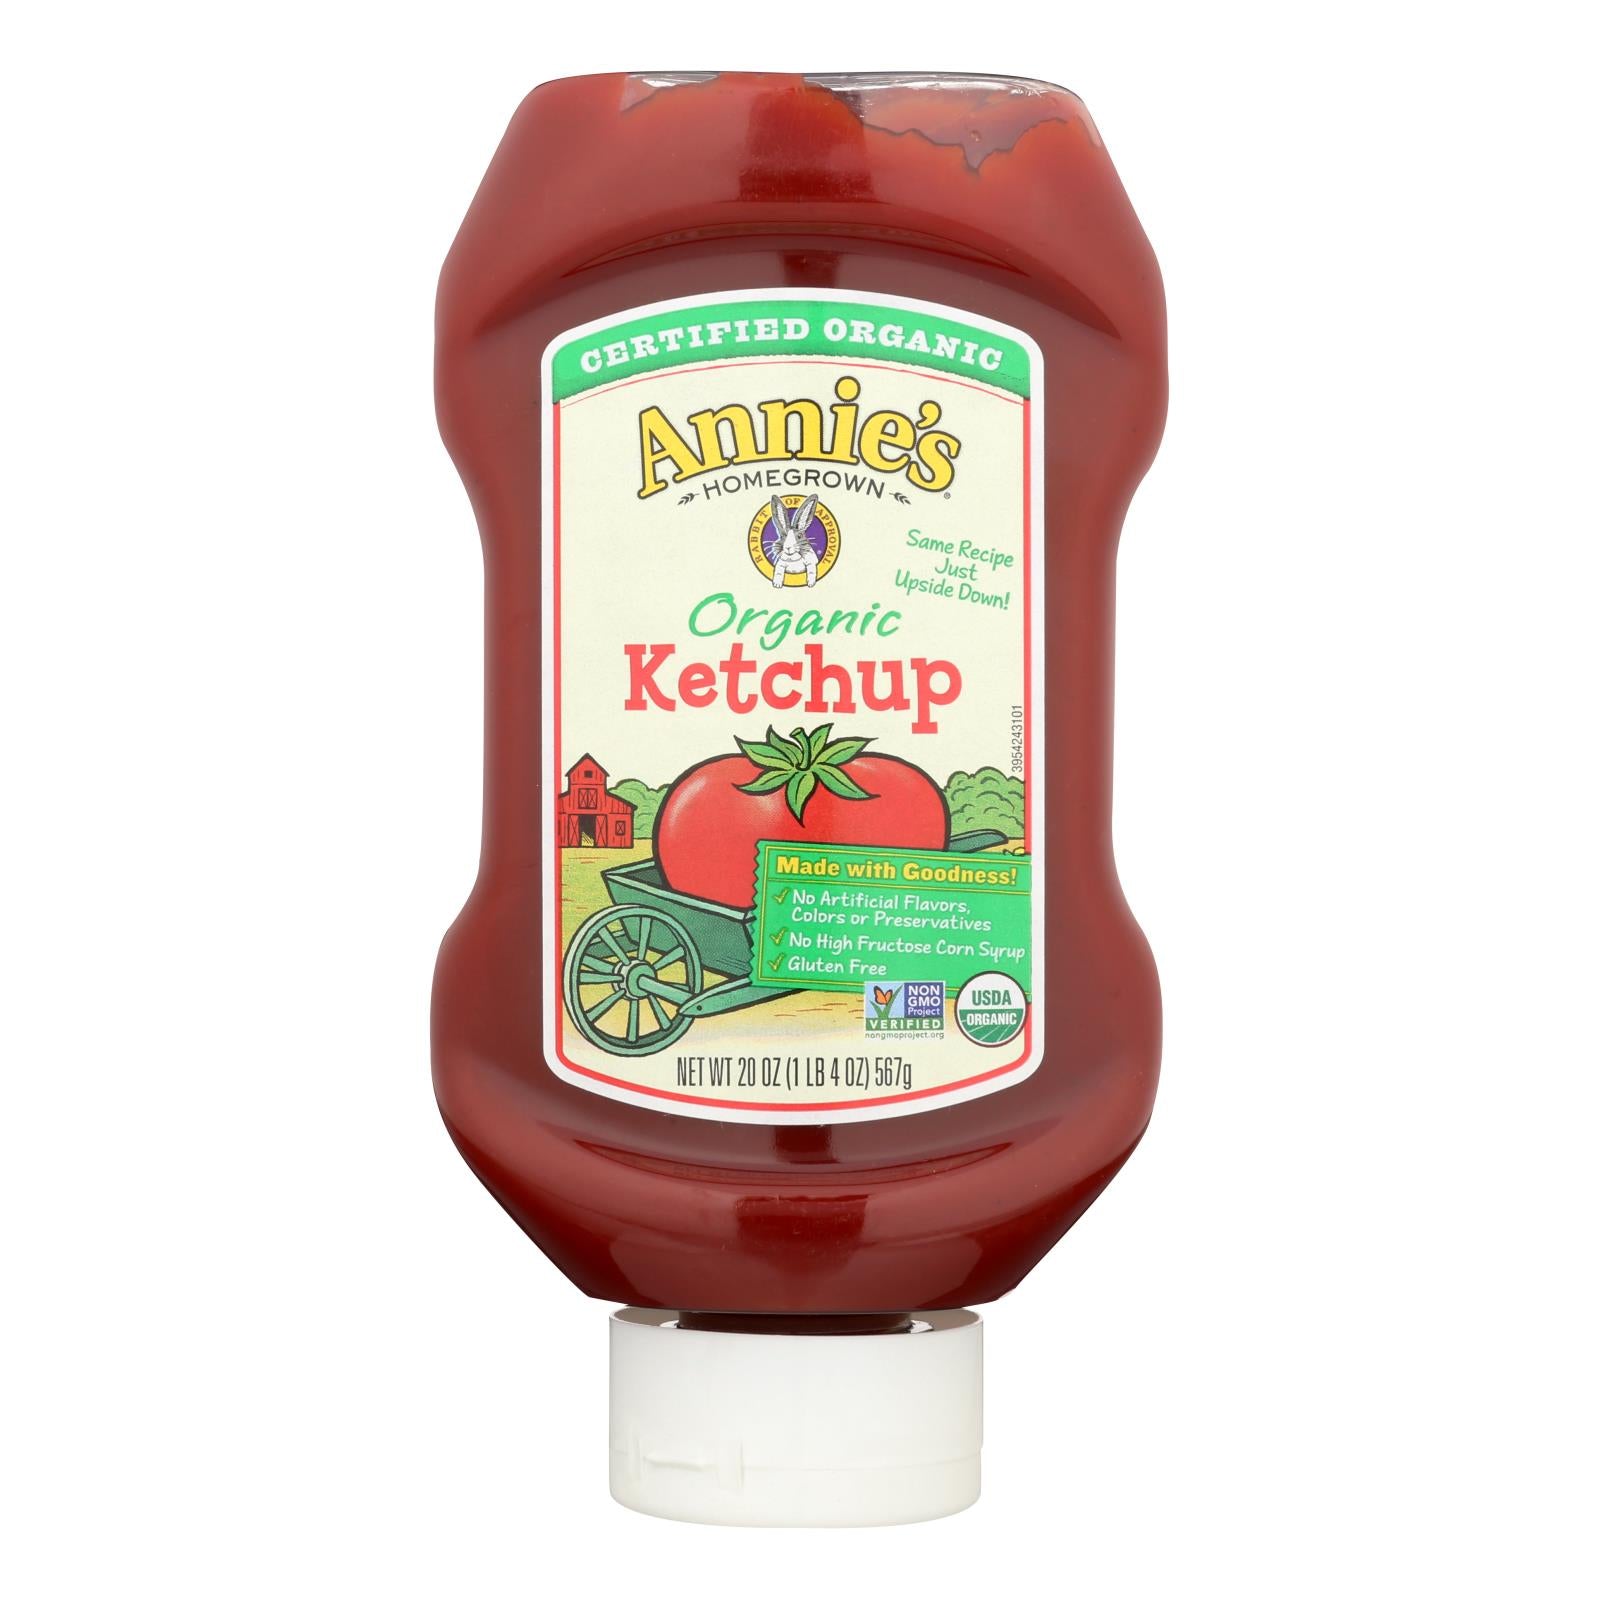 Annie'S Homegrown, Annie's Homegrown Annie's Naturals Organic Ketchup - Case of 12 - 20 oz. (Pack of 12)